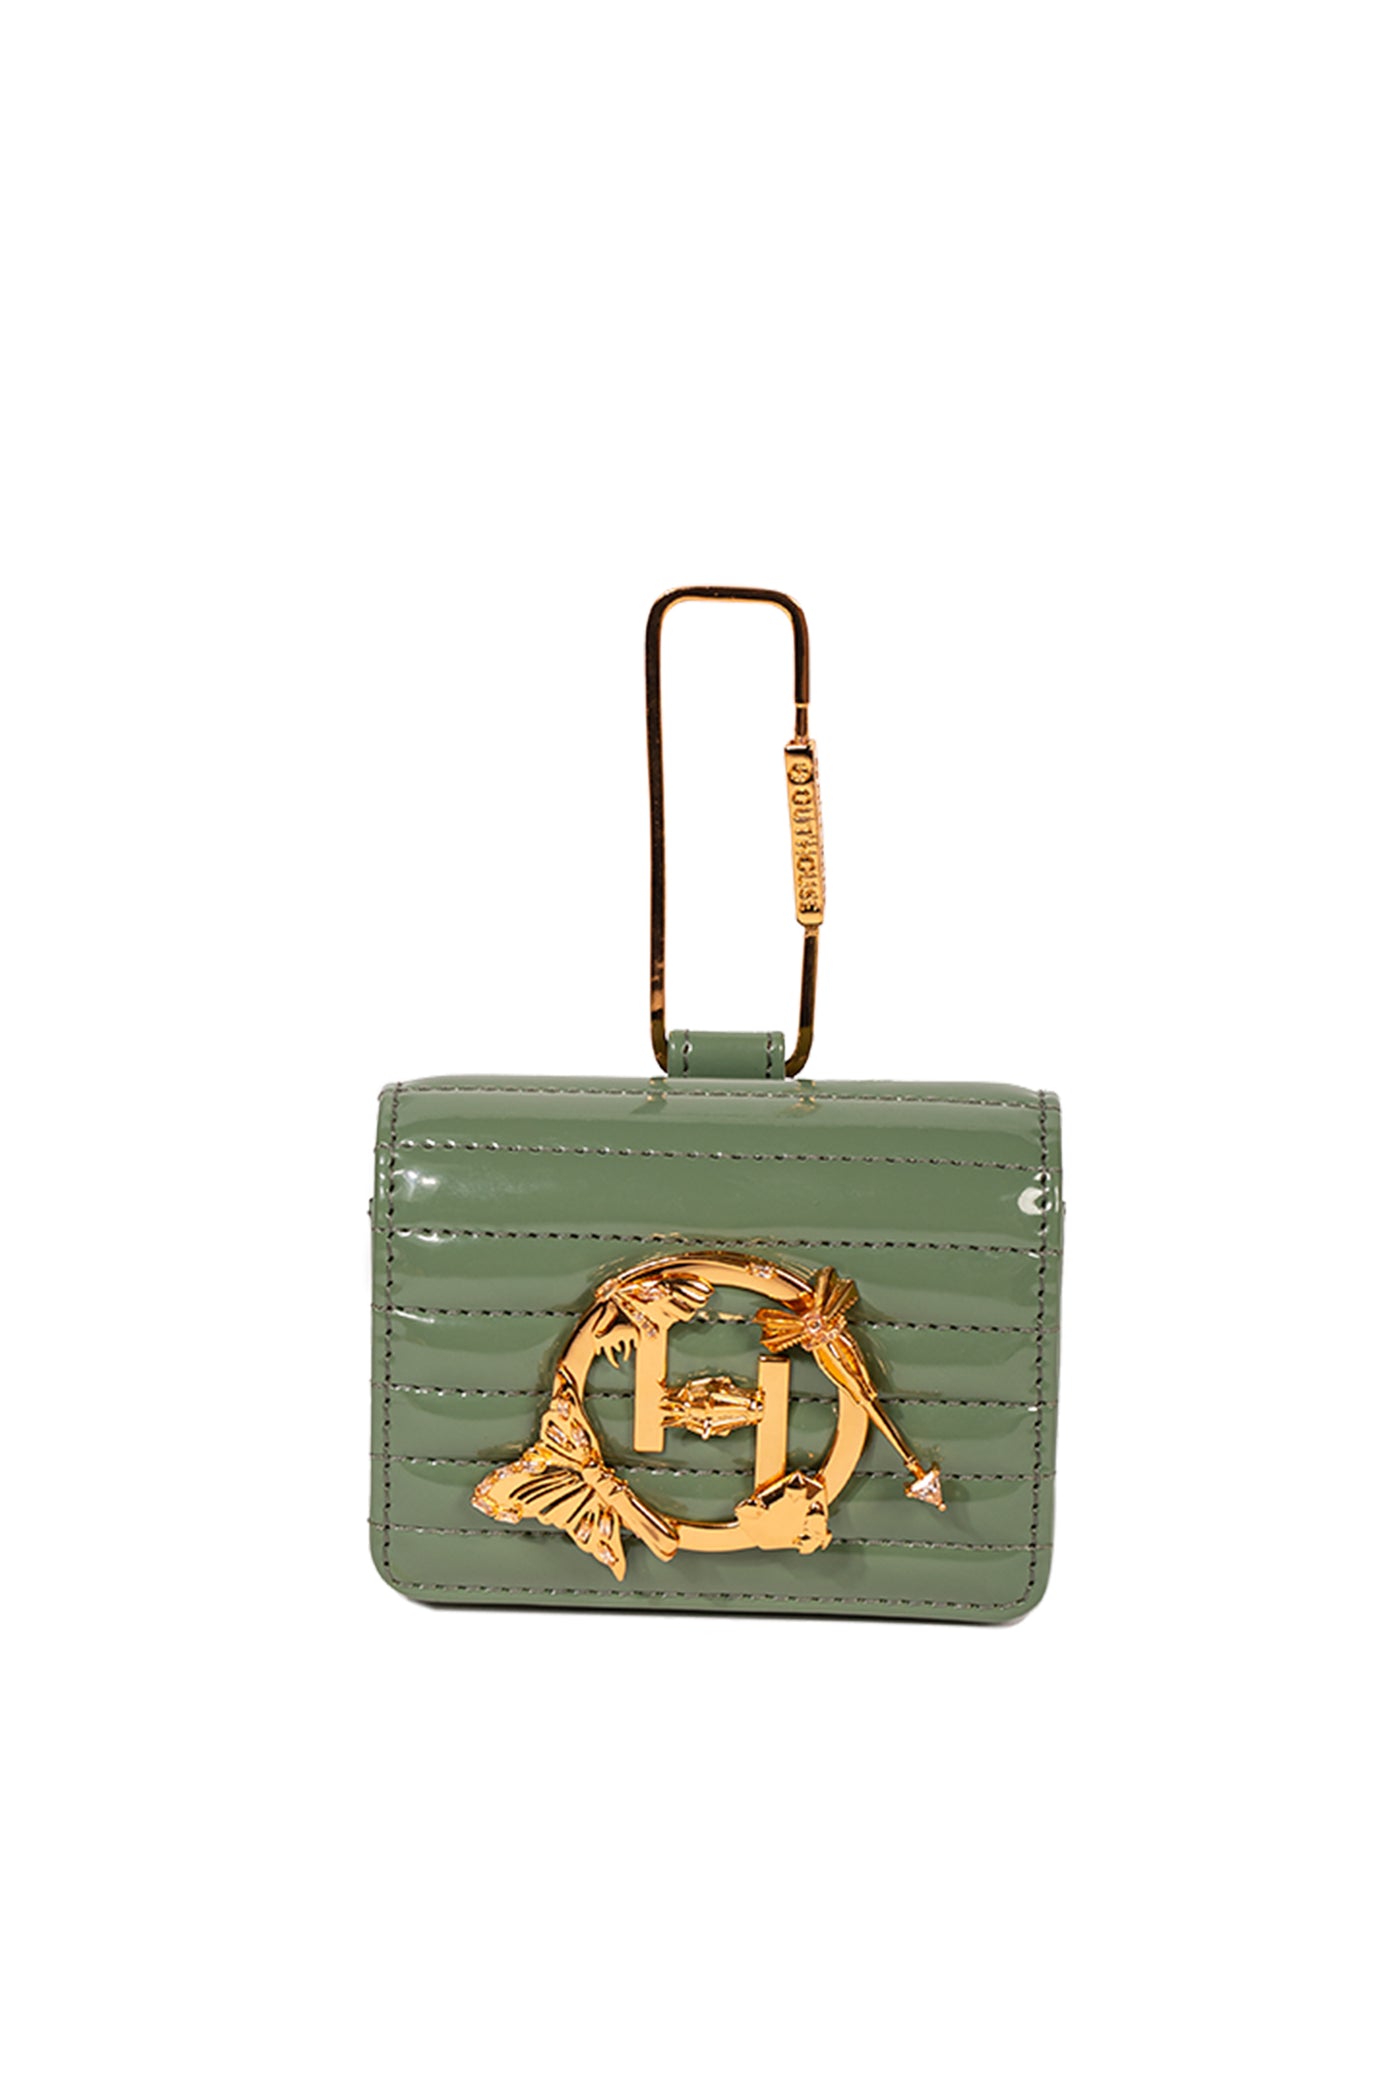 outhouse jewellery The Oh V Furbie - Fern Green bag accessories online shopping melange singapore indian designer wear